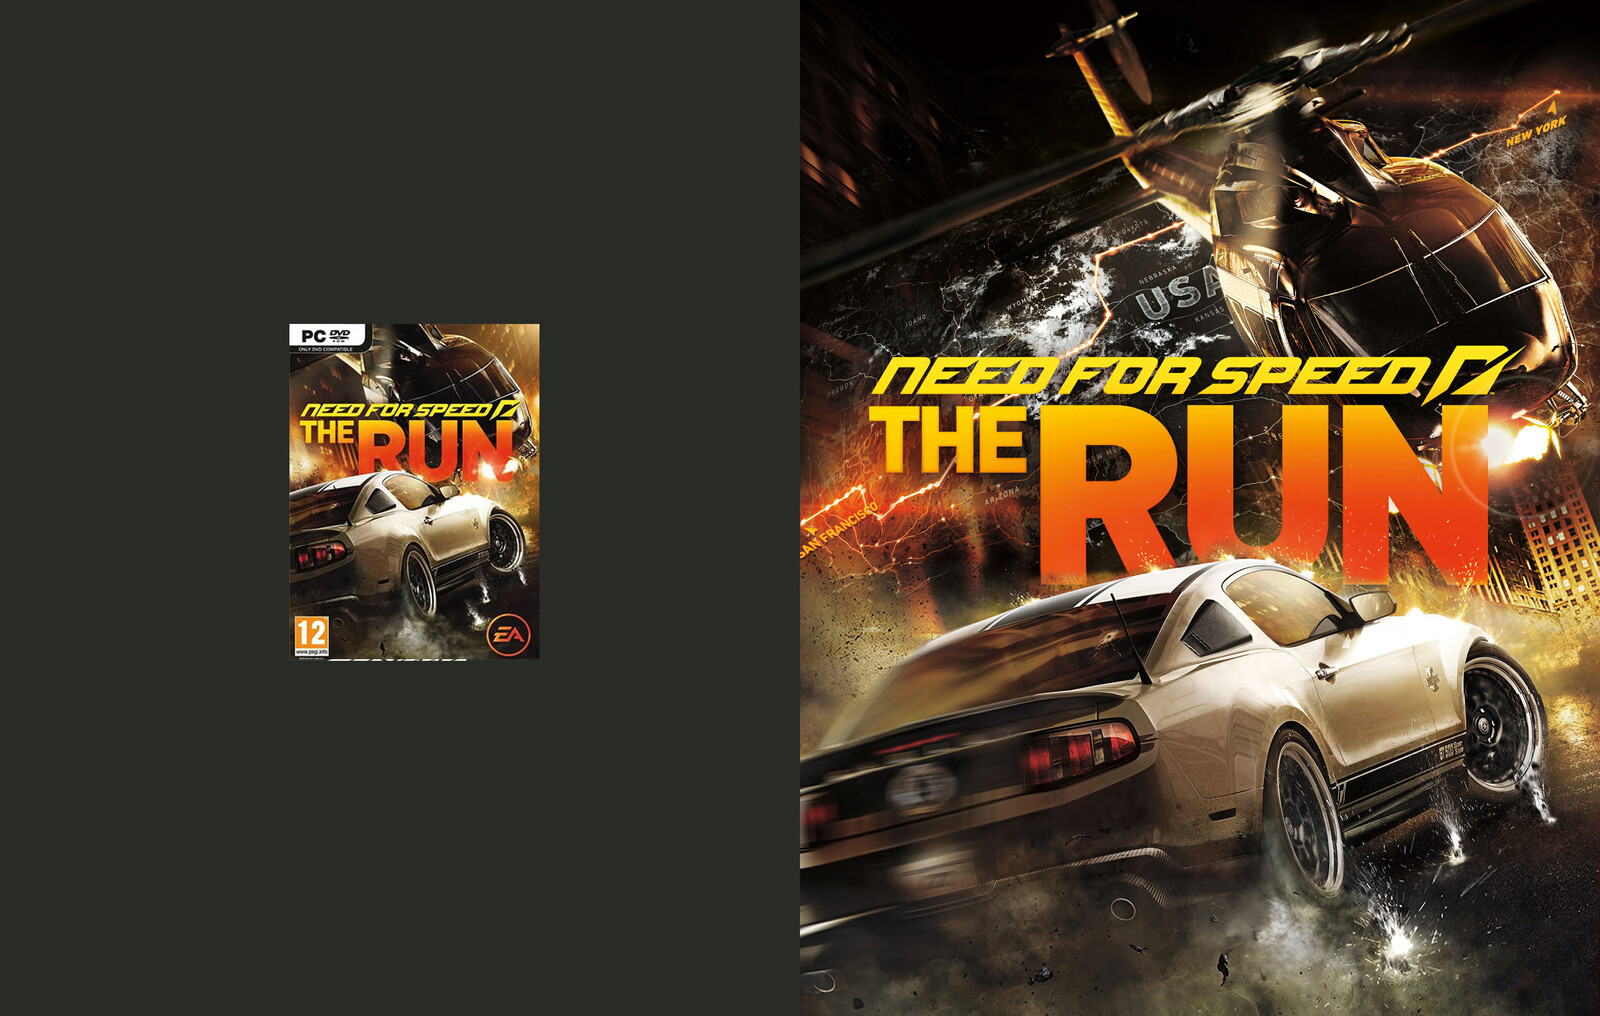 Need for Speed The Run (Original Scan vs. Poster format)